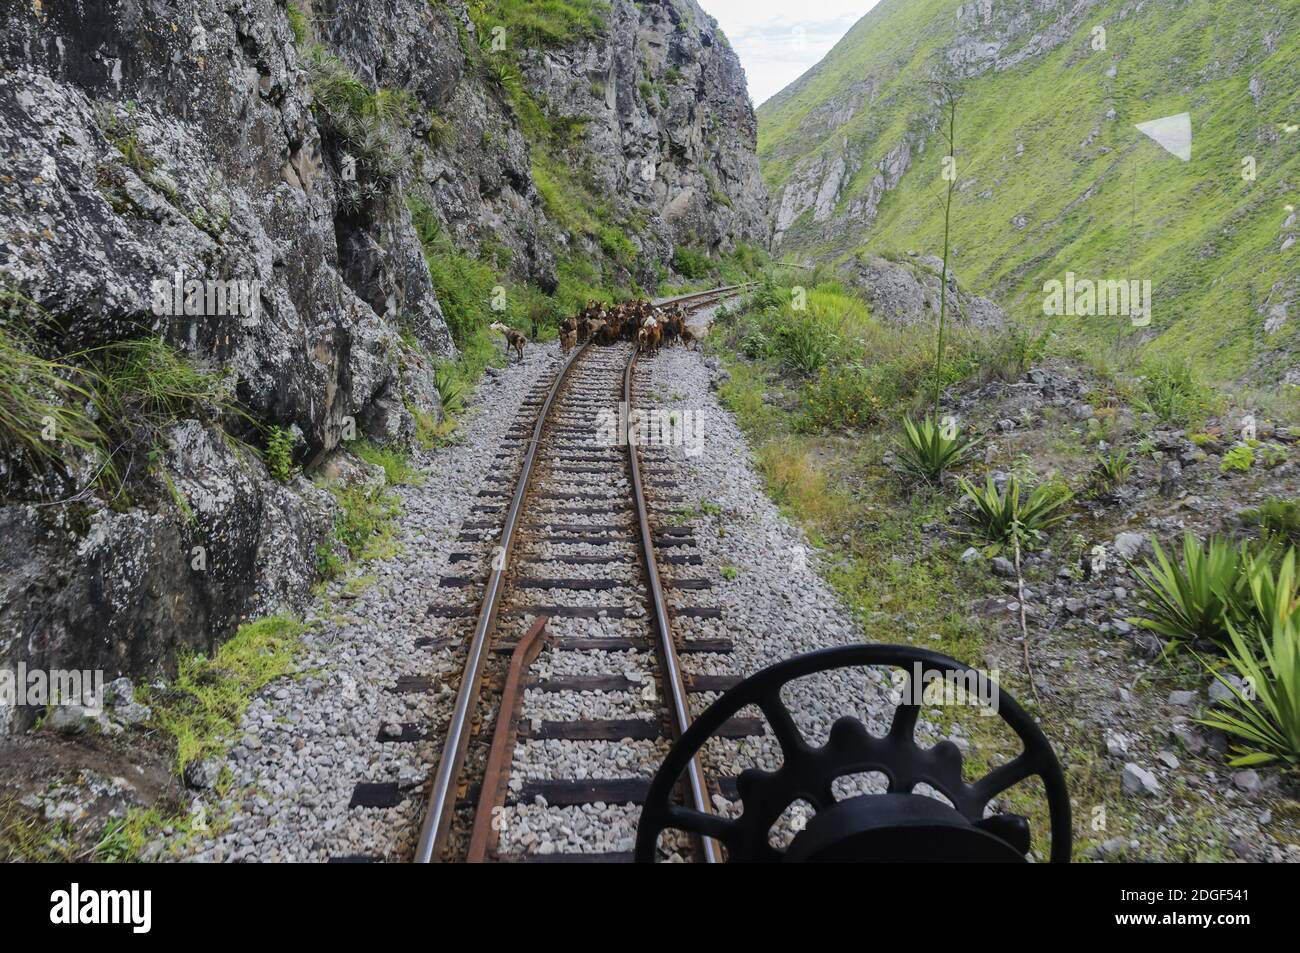 Train ride in the Andes to Devil's Nose in Ecuador, on the tracks is a herd of goats. Stock Photo